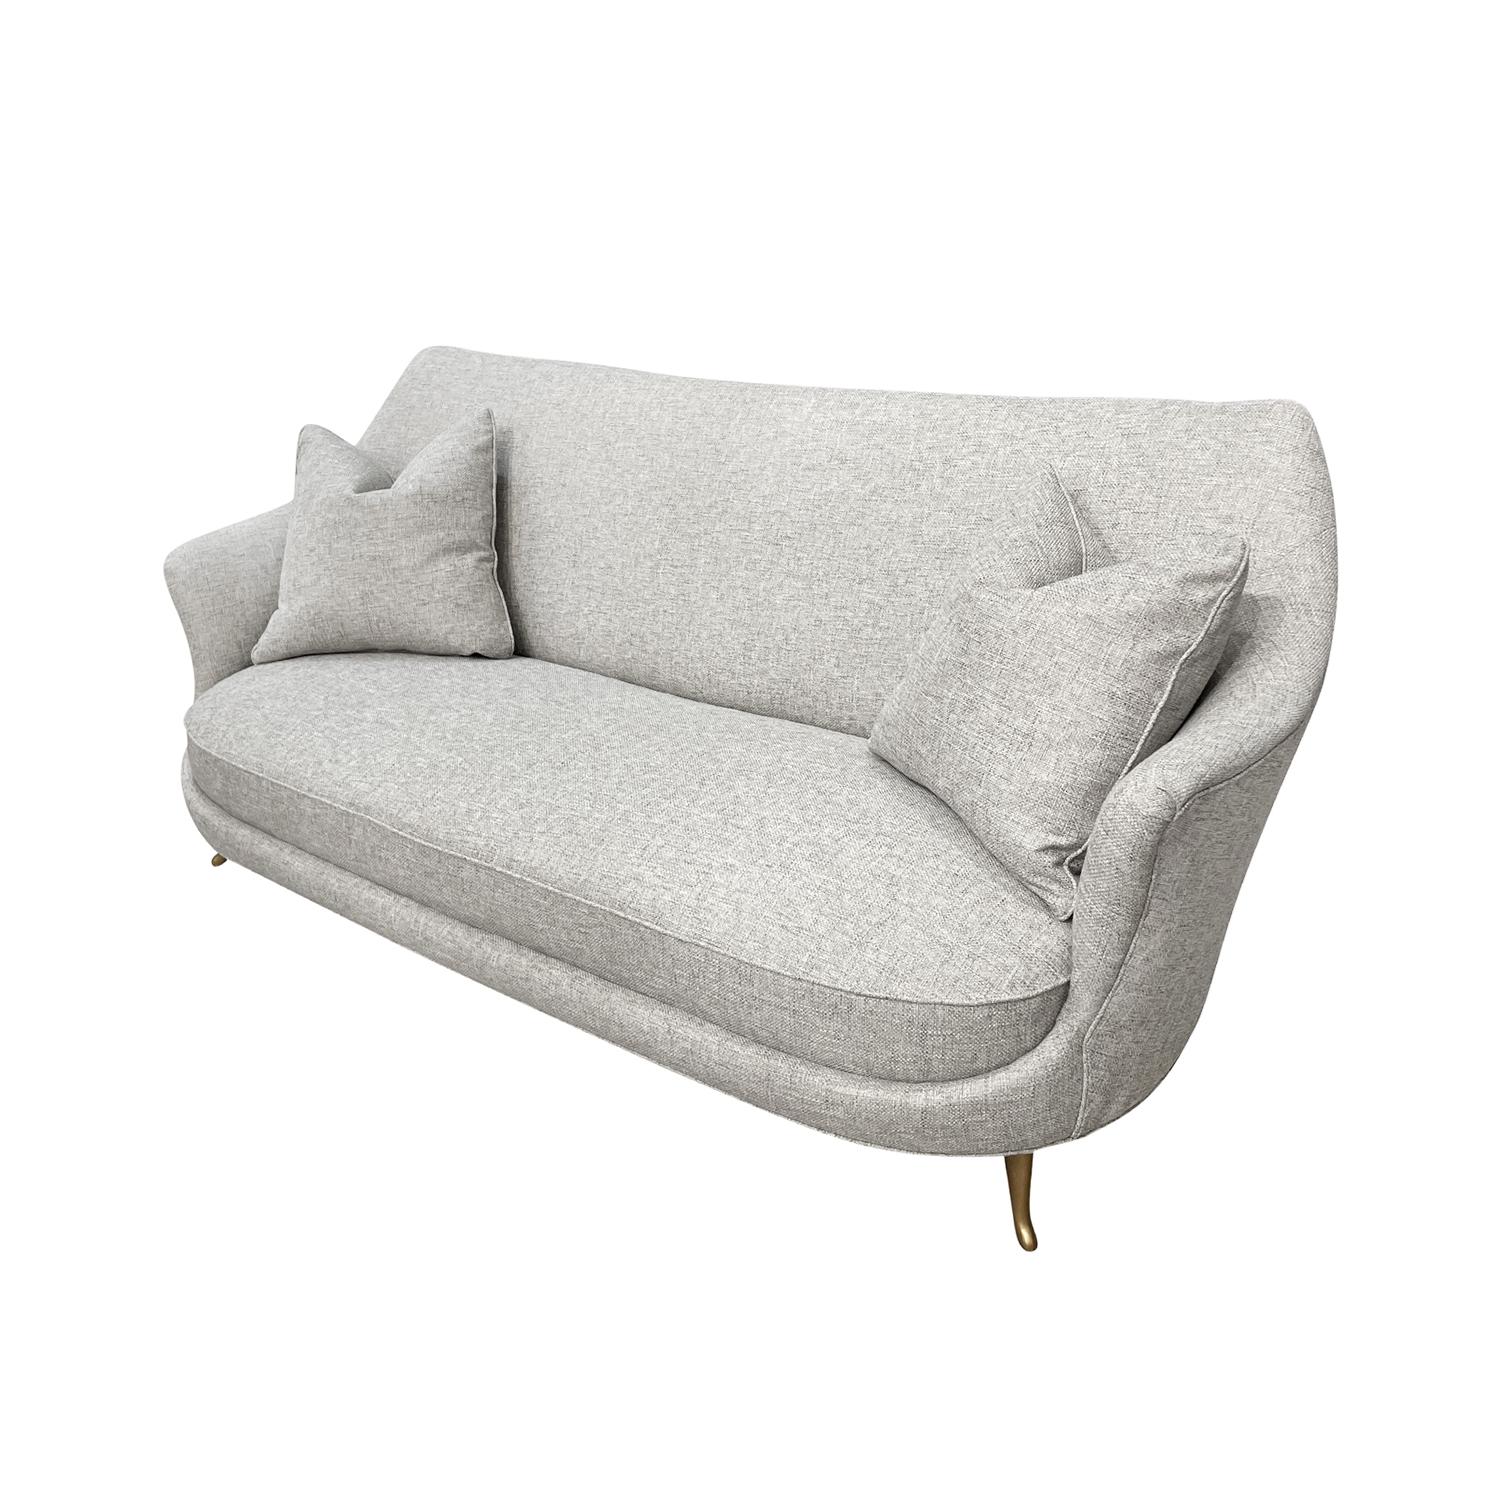 Hand-Crafted 20th Century Grey Italian Two Seater Sofa, Vintage Canapé by ISA Bergamo For Sale